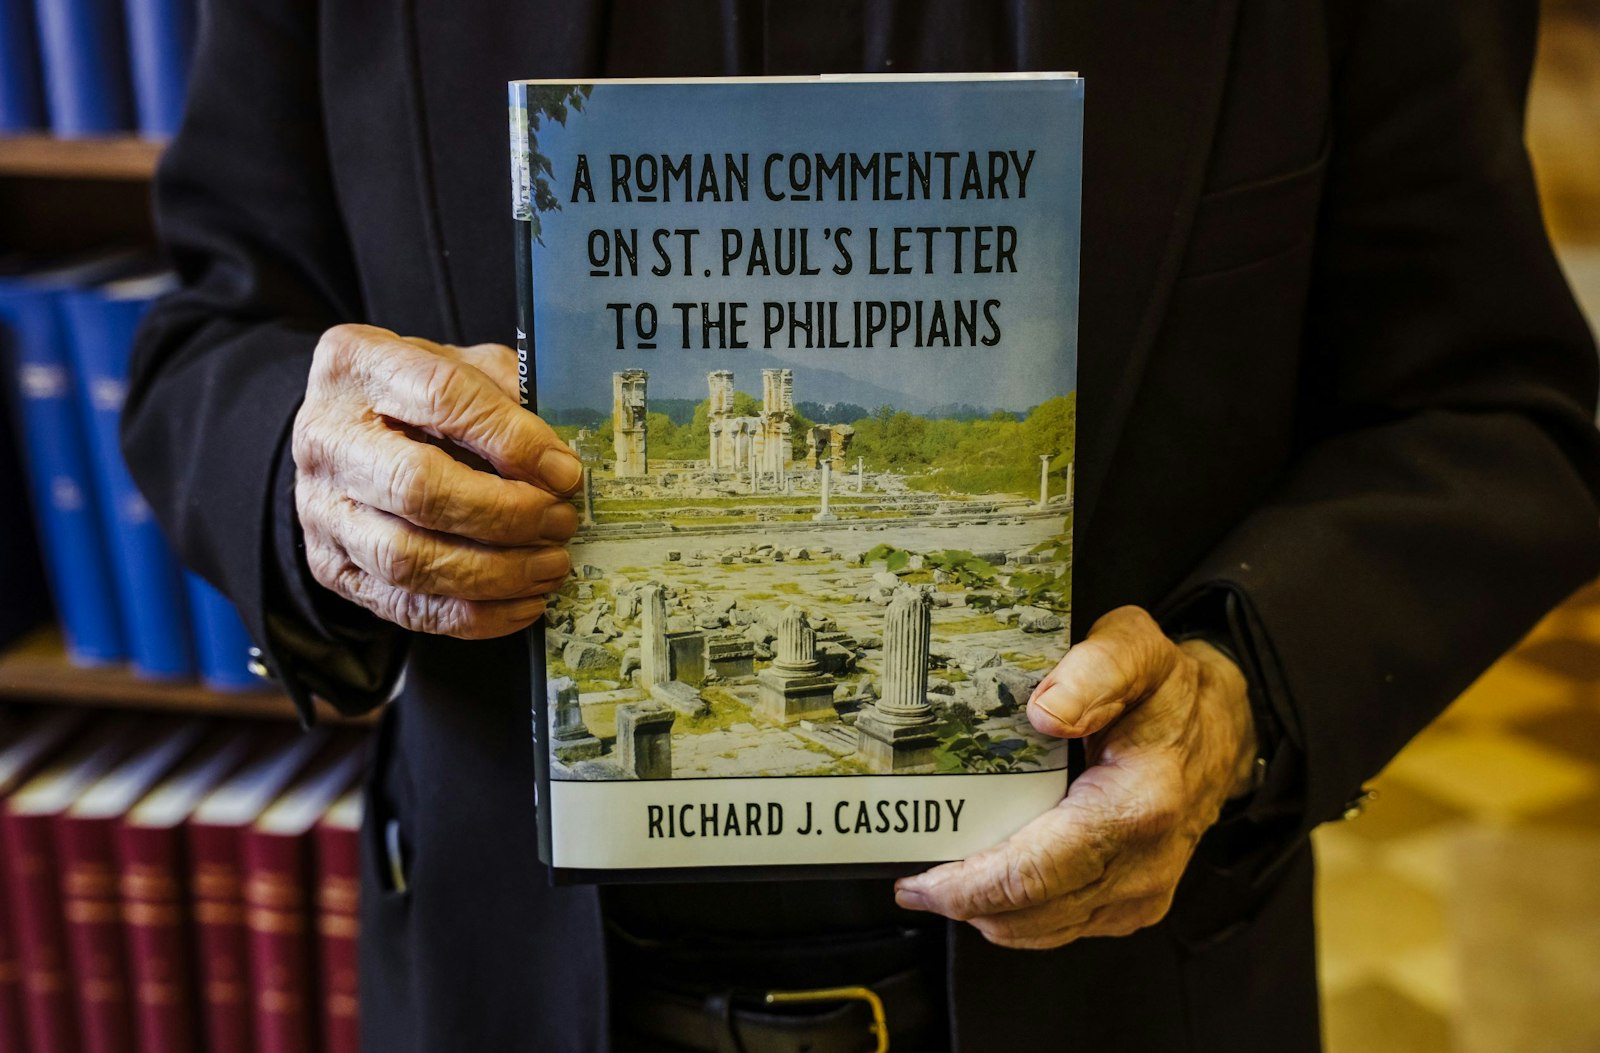 "A Roman Commentary on St. Paul’s Letter to the Philippians" (Herder & Herder, 2020) is Fr. Cassidy's eighth book and a follow-up on his 2001 work, "Paul in Chains: Roman Imprisonment and the Letters of St. Paul"